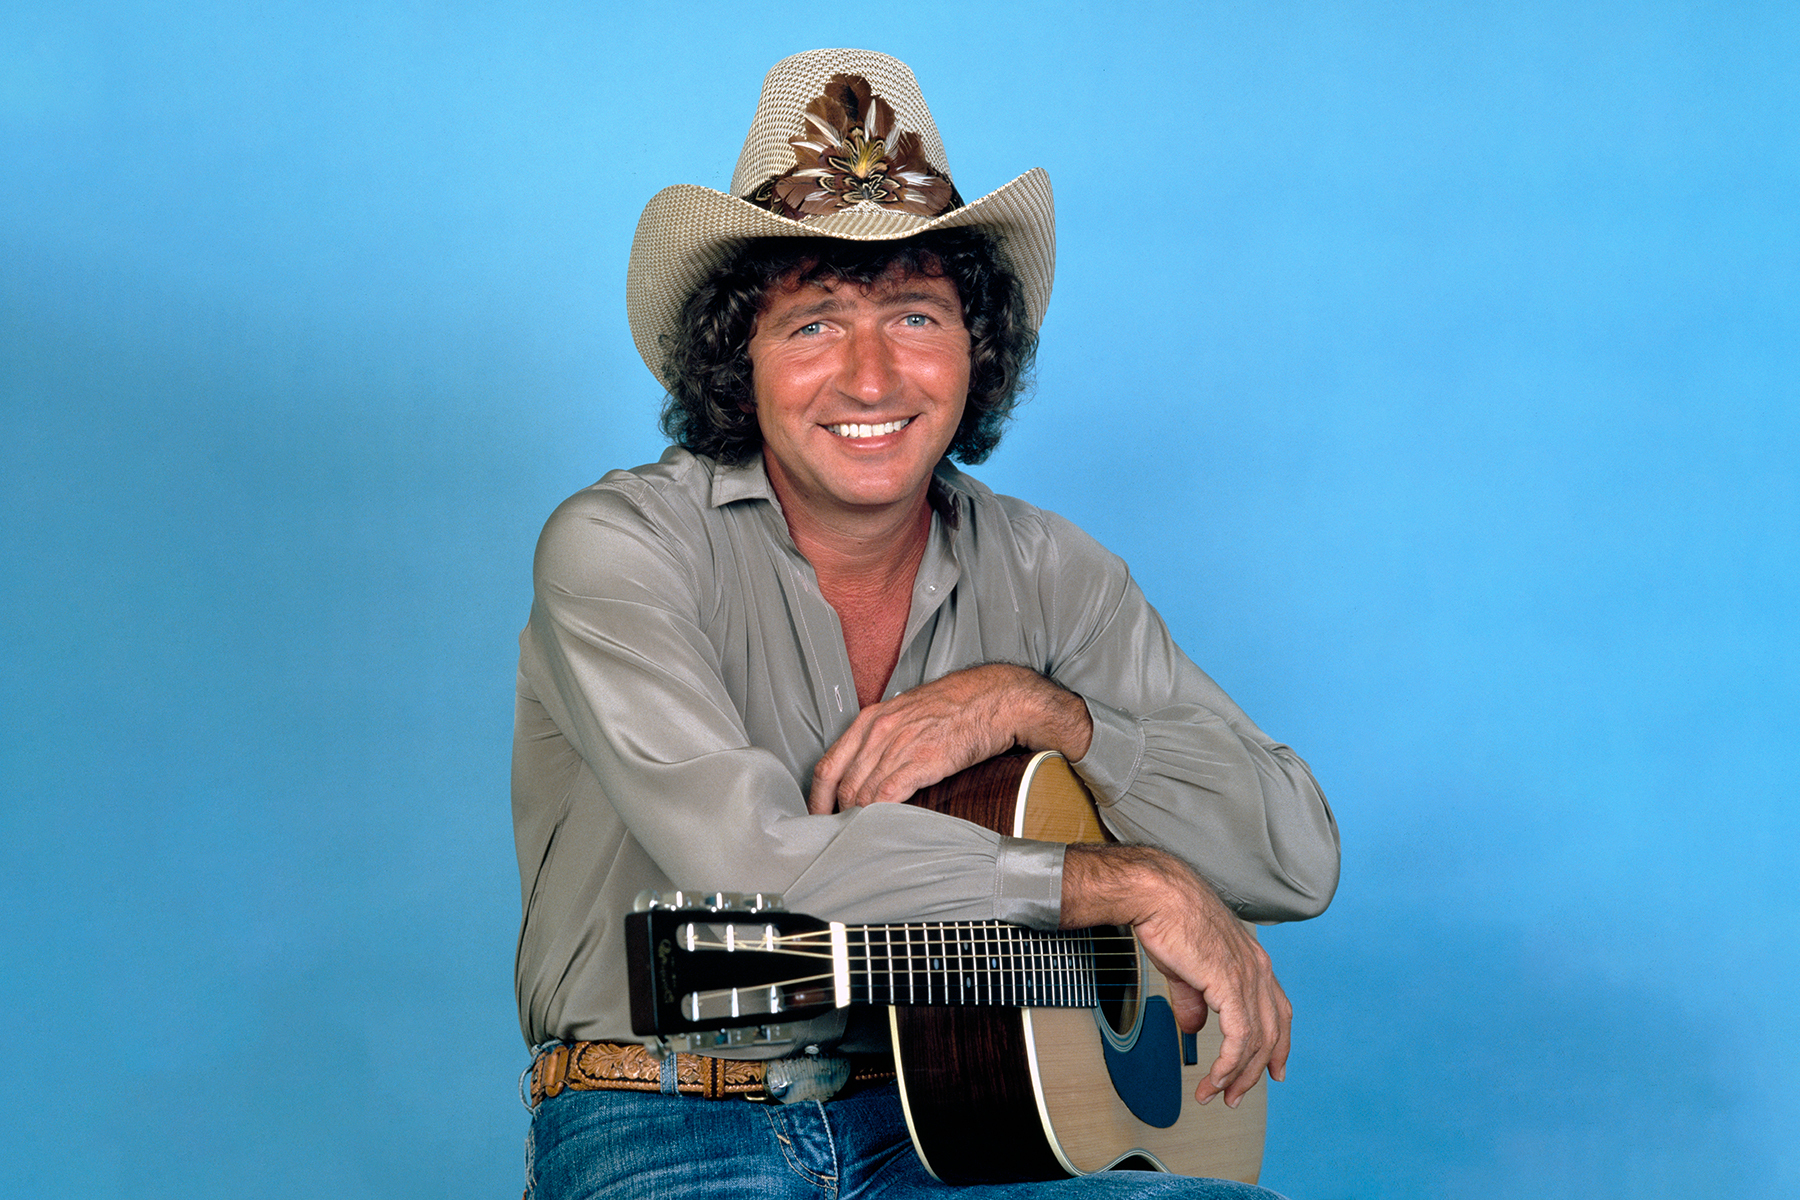 Mac Davis, Country Singer and Elvis Presley Songwriter, Dead at 78